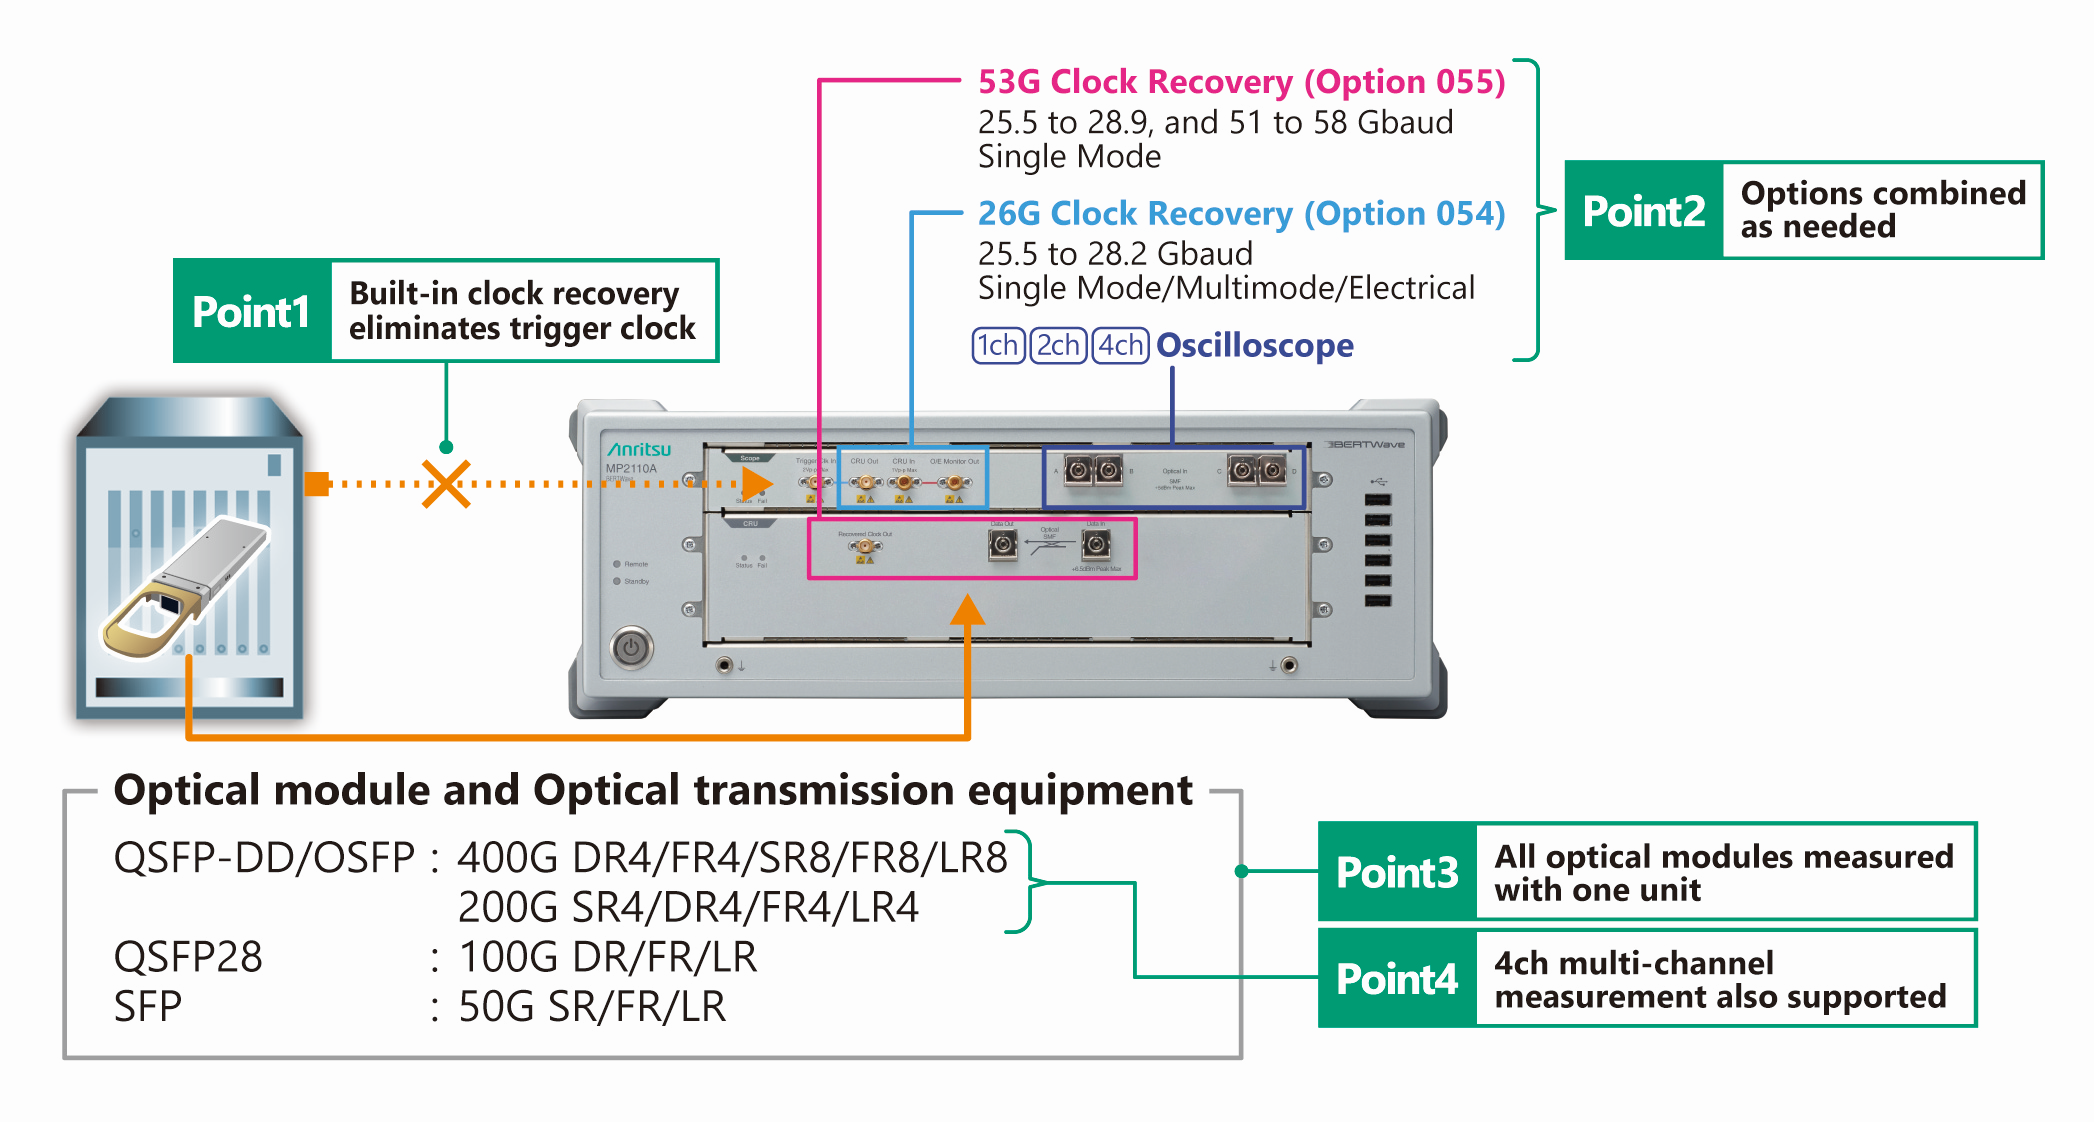 MP2110A Optical Module Measurement Solution using Clock Recovery Options